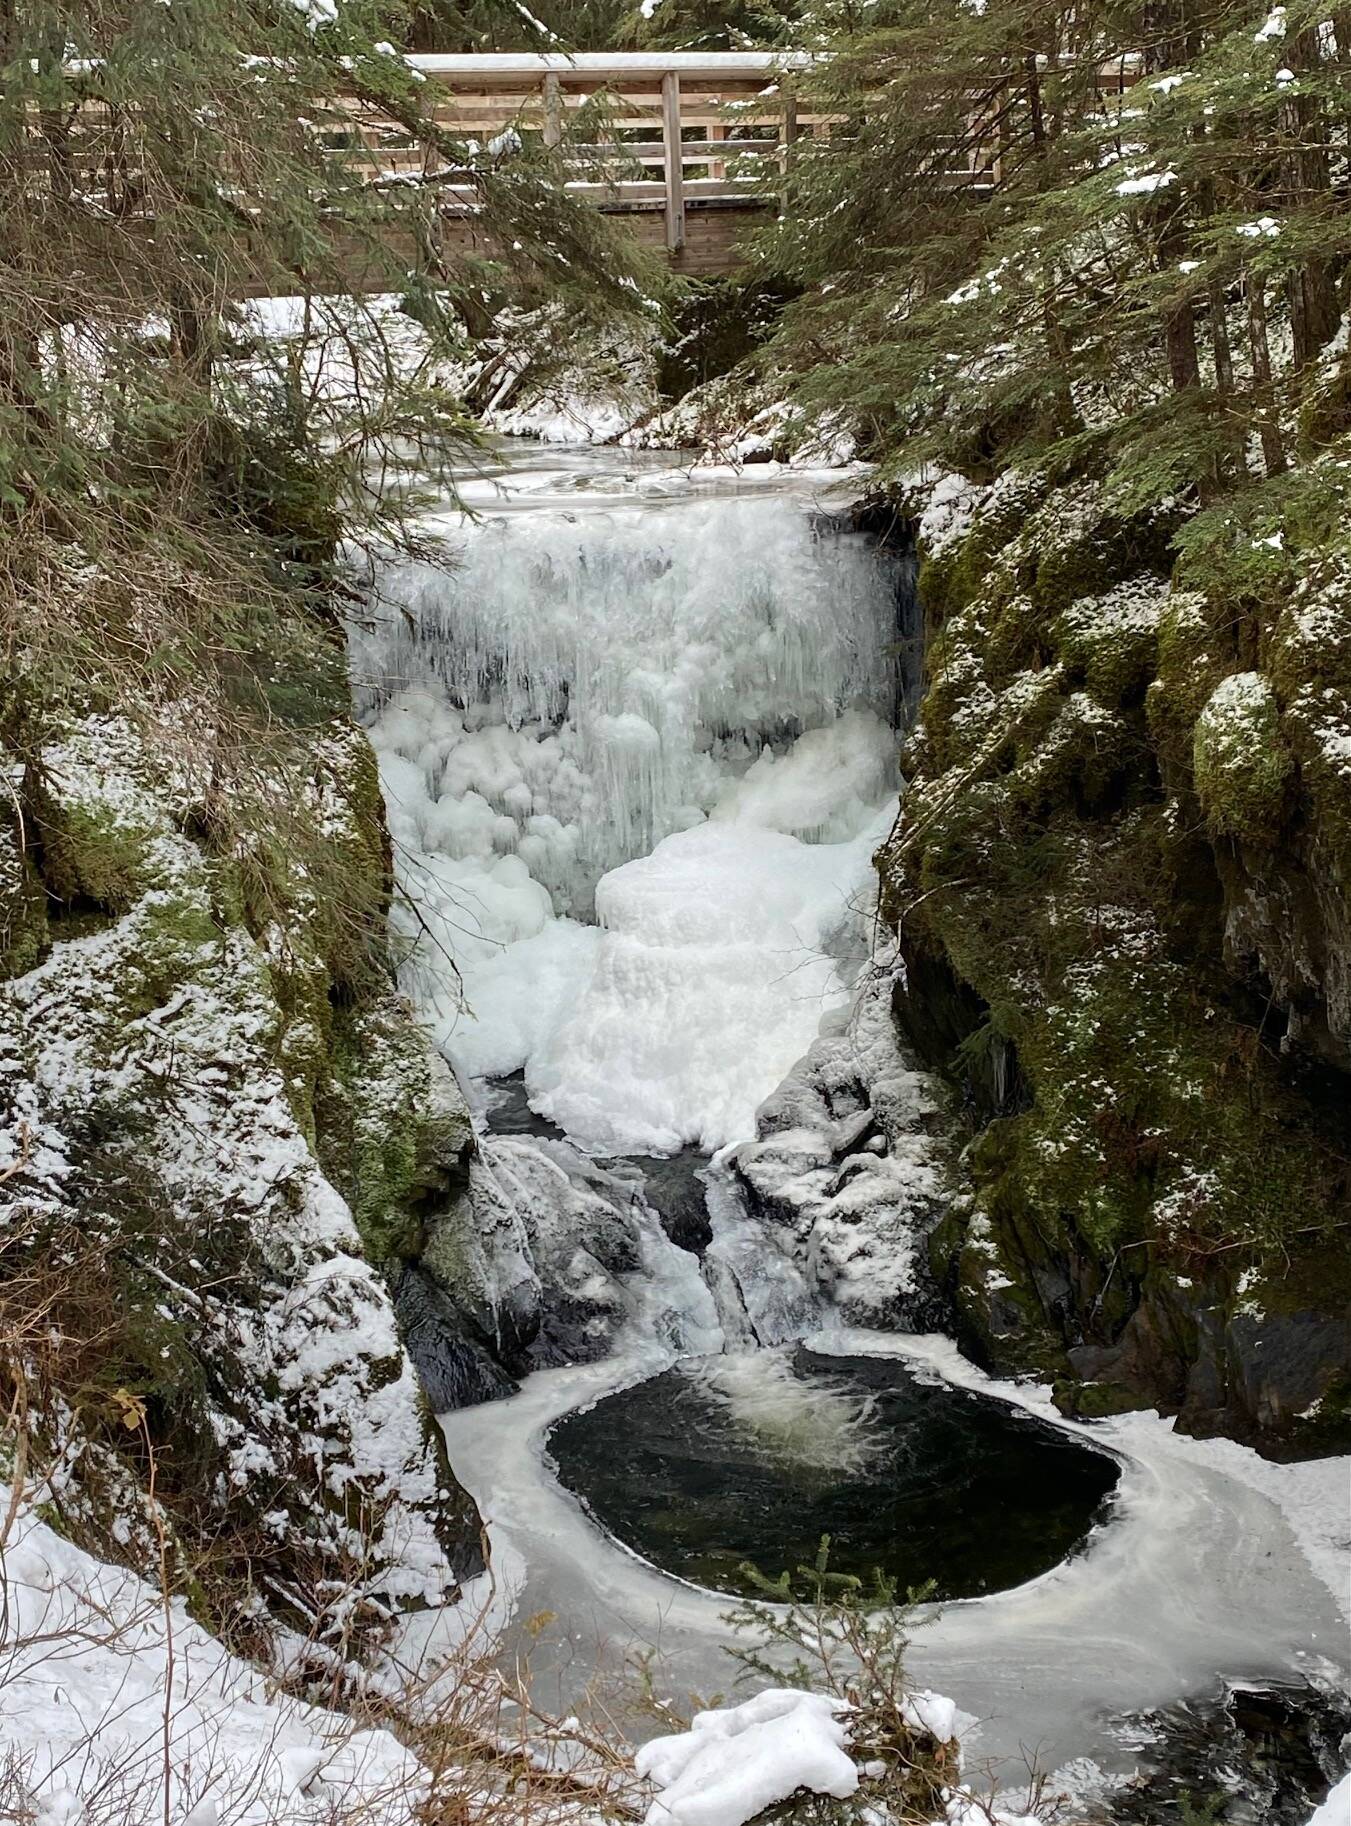 A bridge over an ice encrusted waterfall emptying into a glacial pool of water along Treadwell Ditch Trail on Nov. 9. (Courtesy Photo / Denise Carroll)